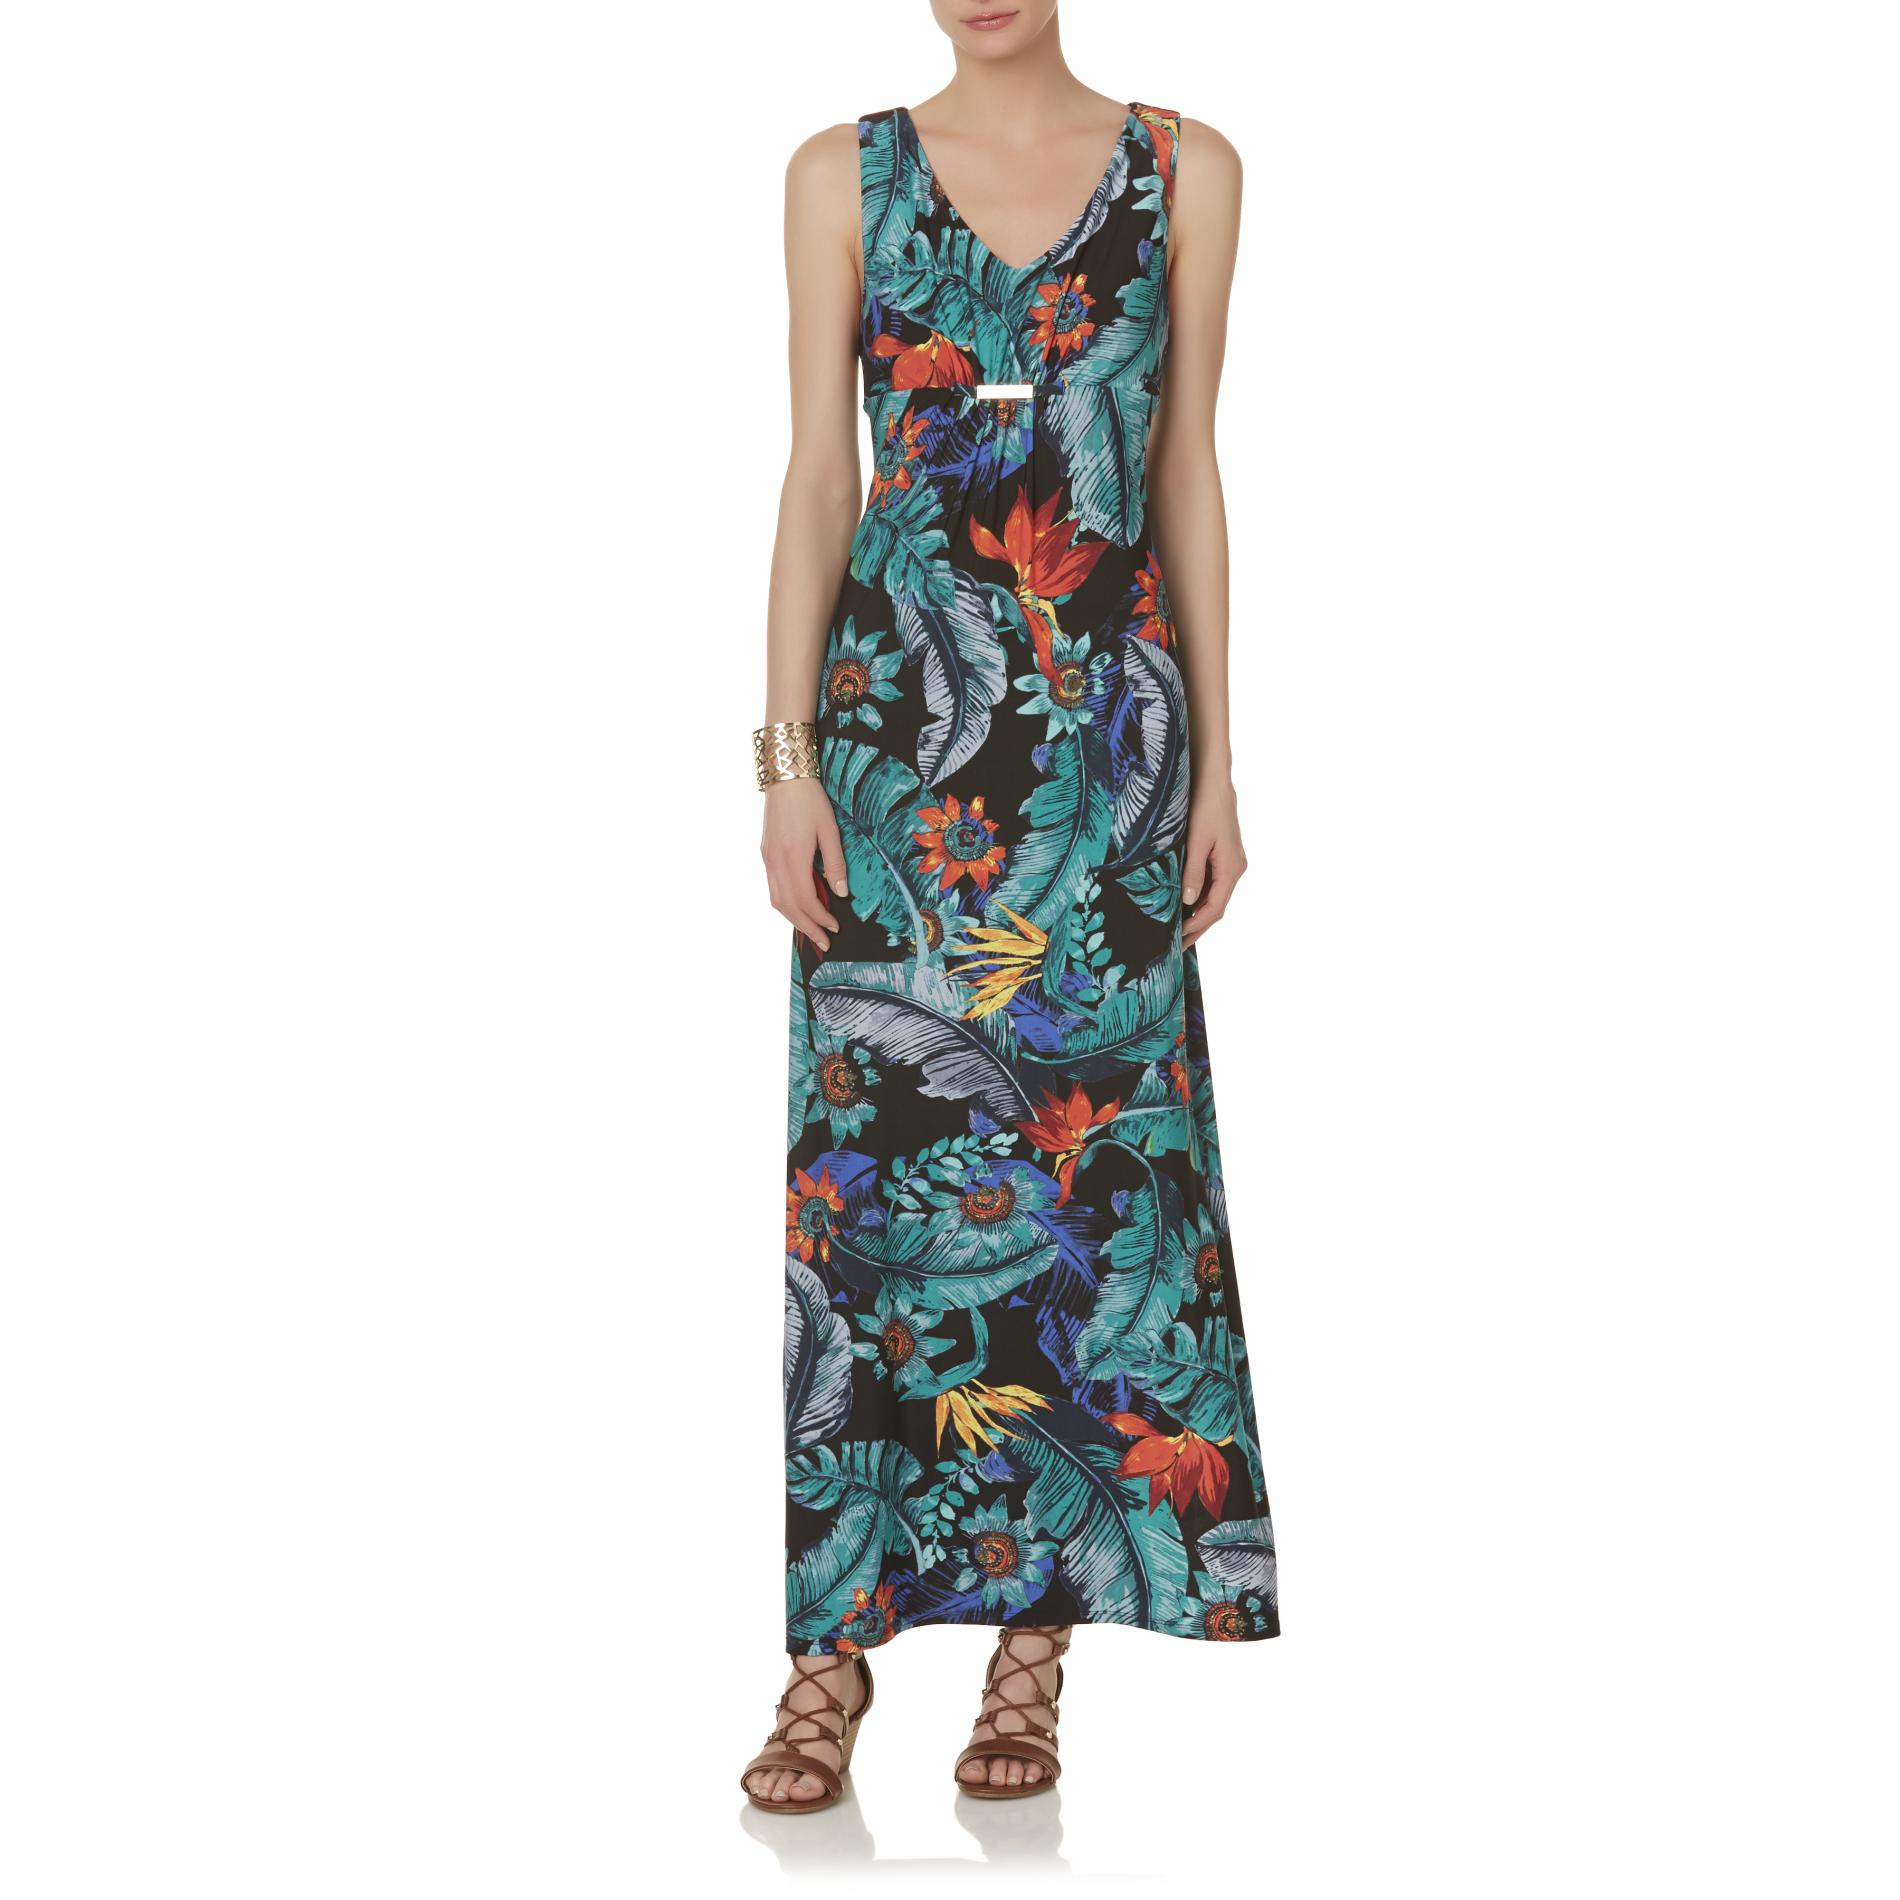 Simply Styled Petites' Sleeveless Maxi Dress - Floral